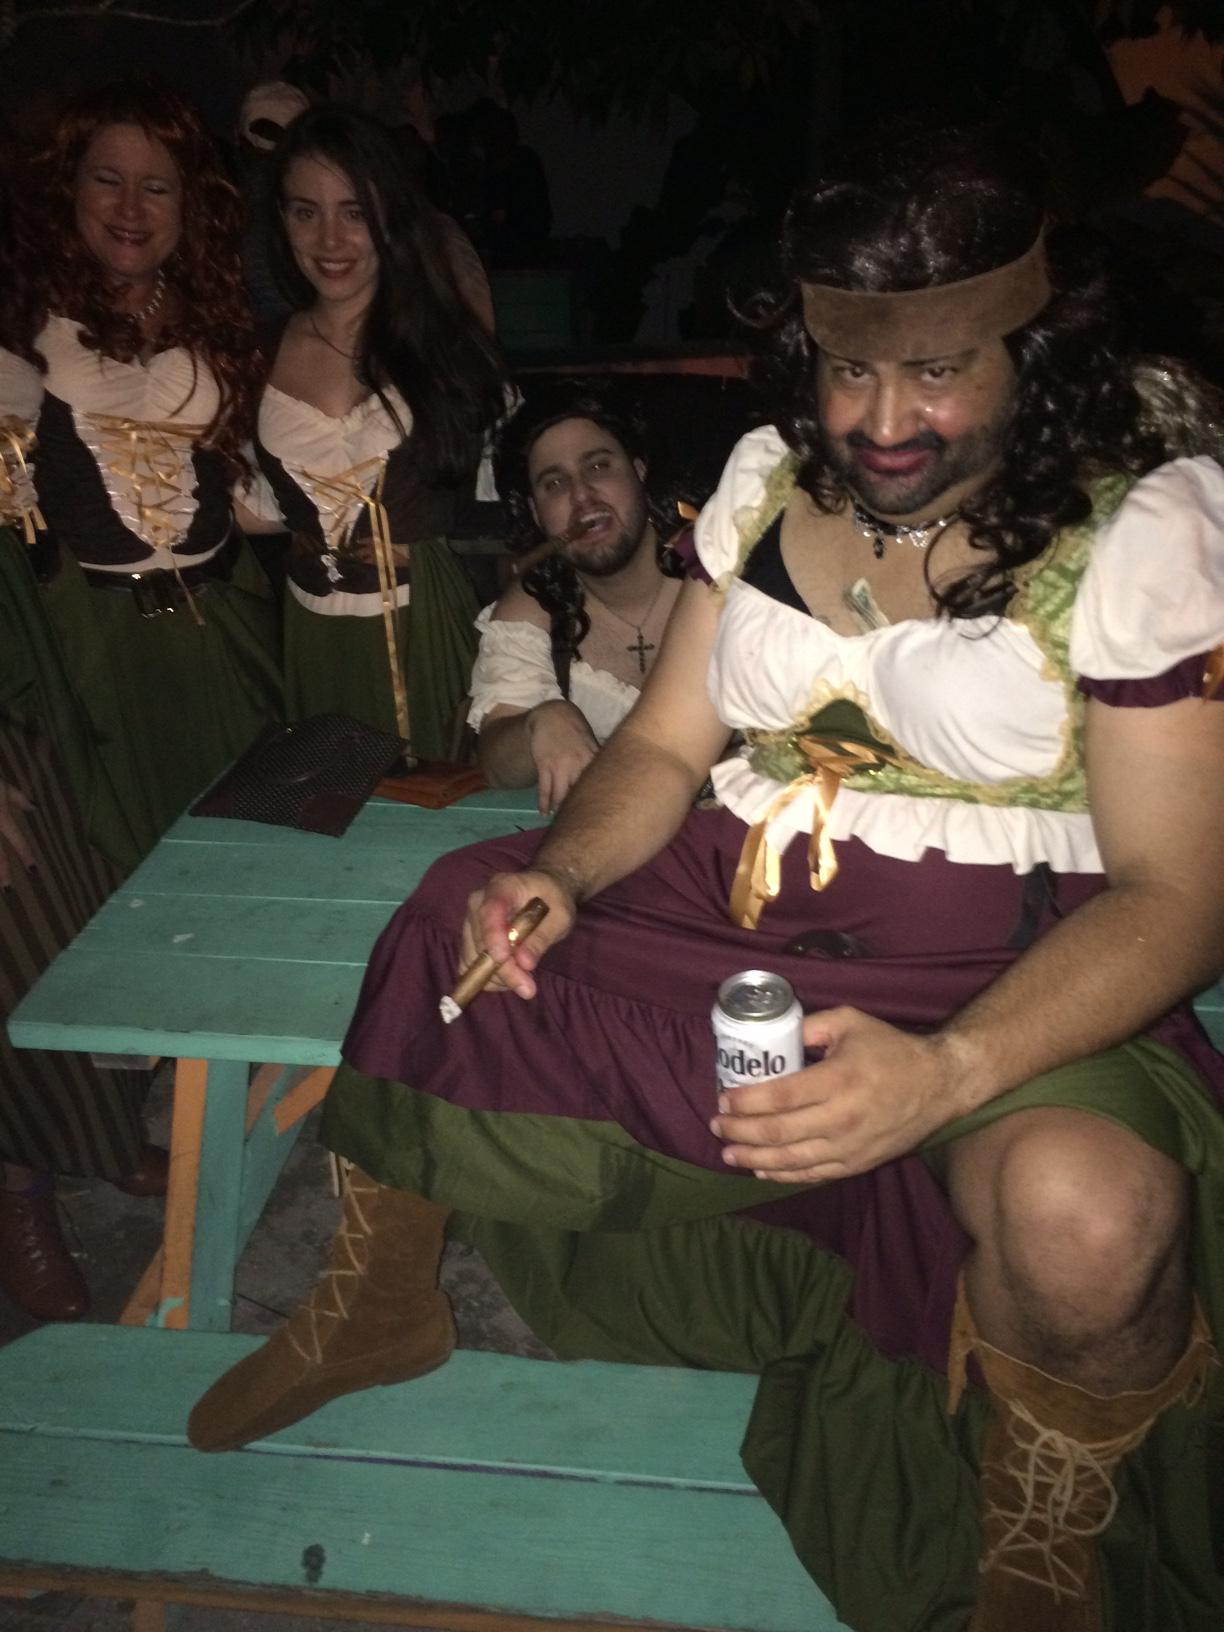 Met this sexy bar wench last night. There's nothing hotter than a babe in a bar wench costume.